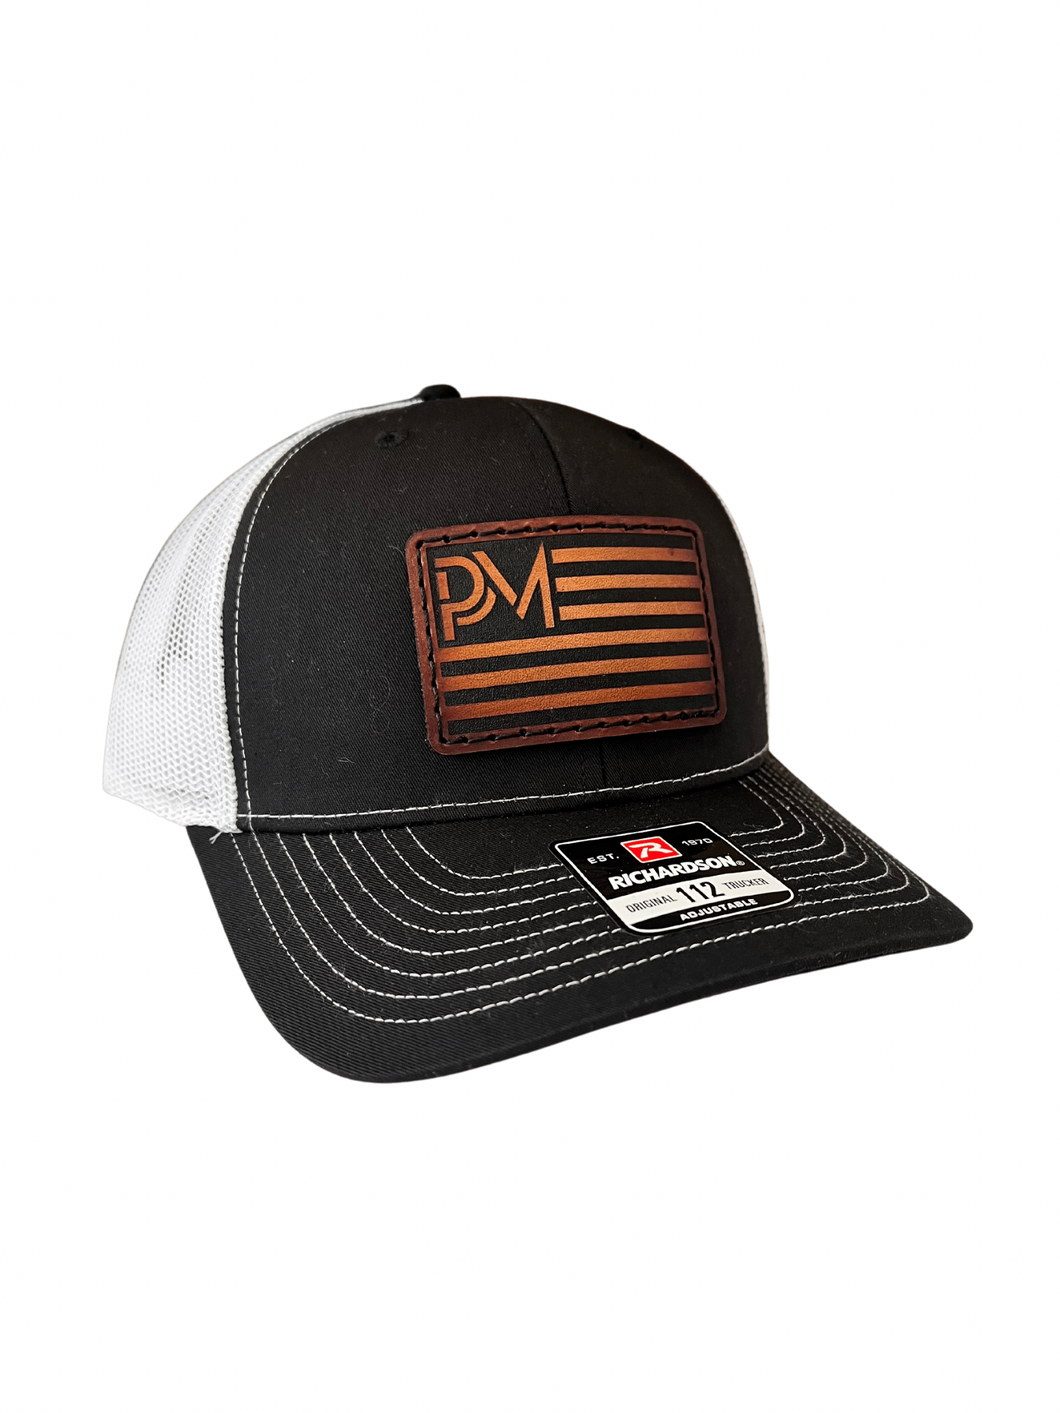 Phaser USA Leather Patch Hat BLK